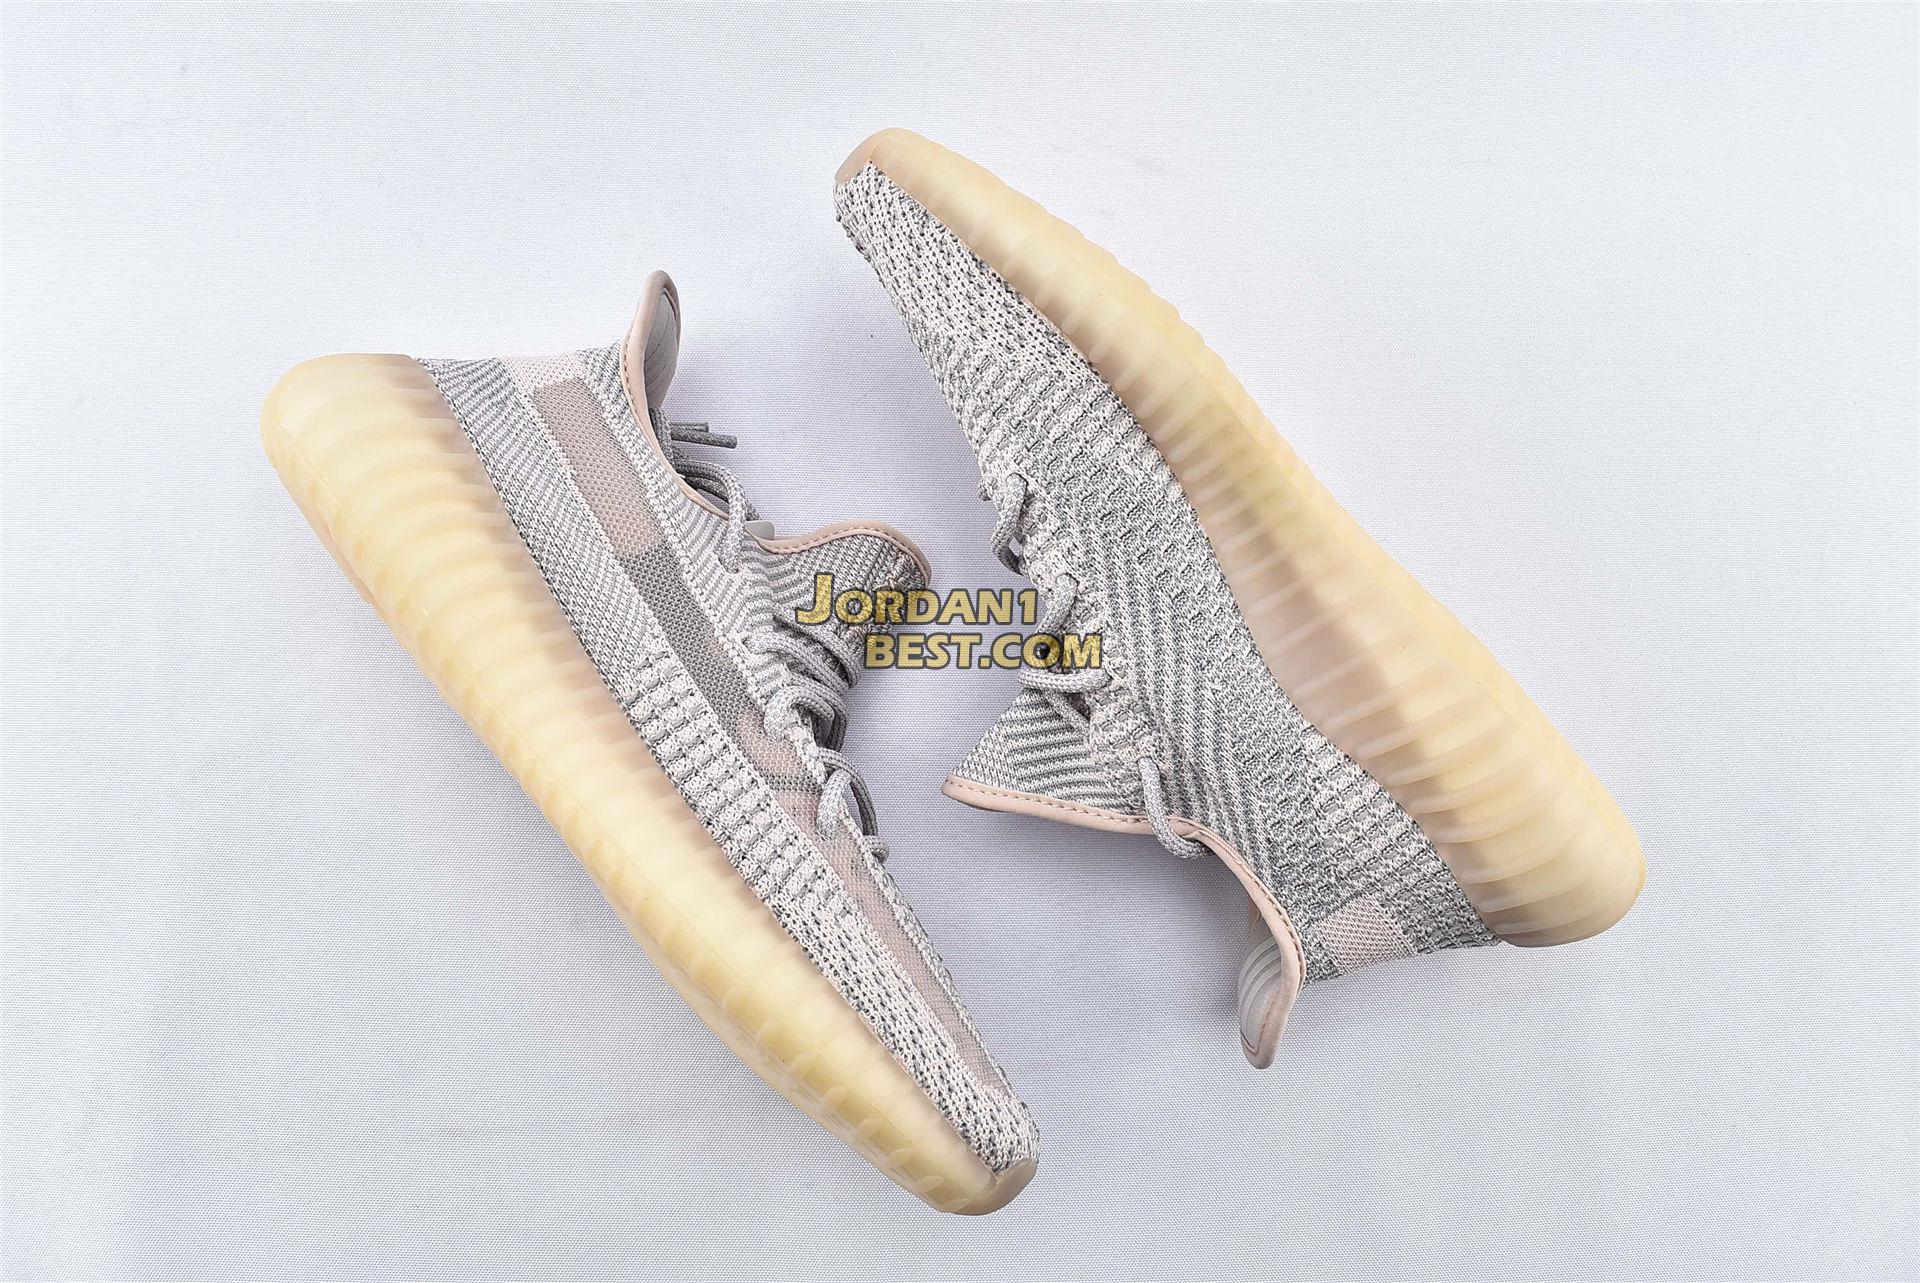 Adidas Yeezy Boost 350 V2 "Synth Non-Reflective" FV5578